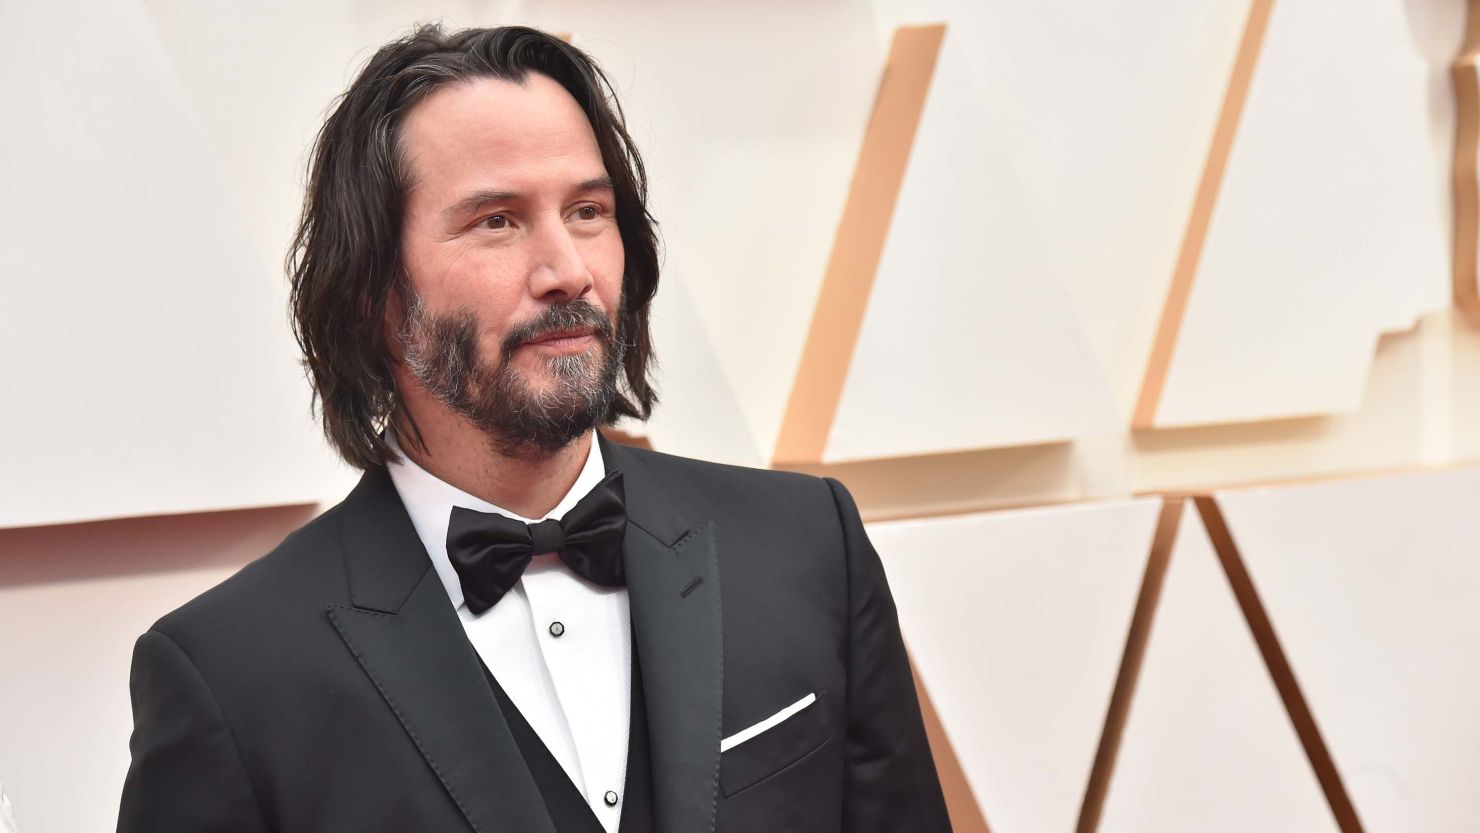 Keanu Reeves has joined forces with some top comic book names to create "BRZRKR."